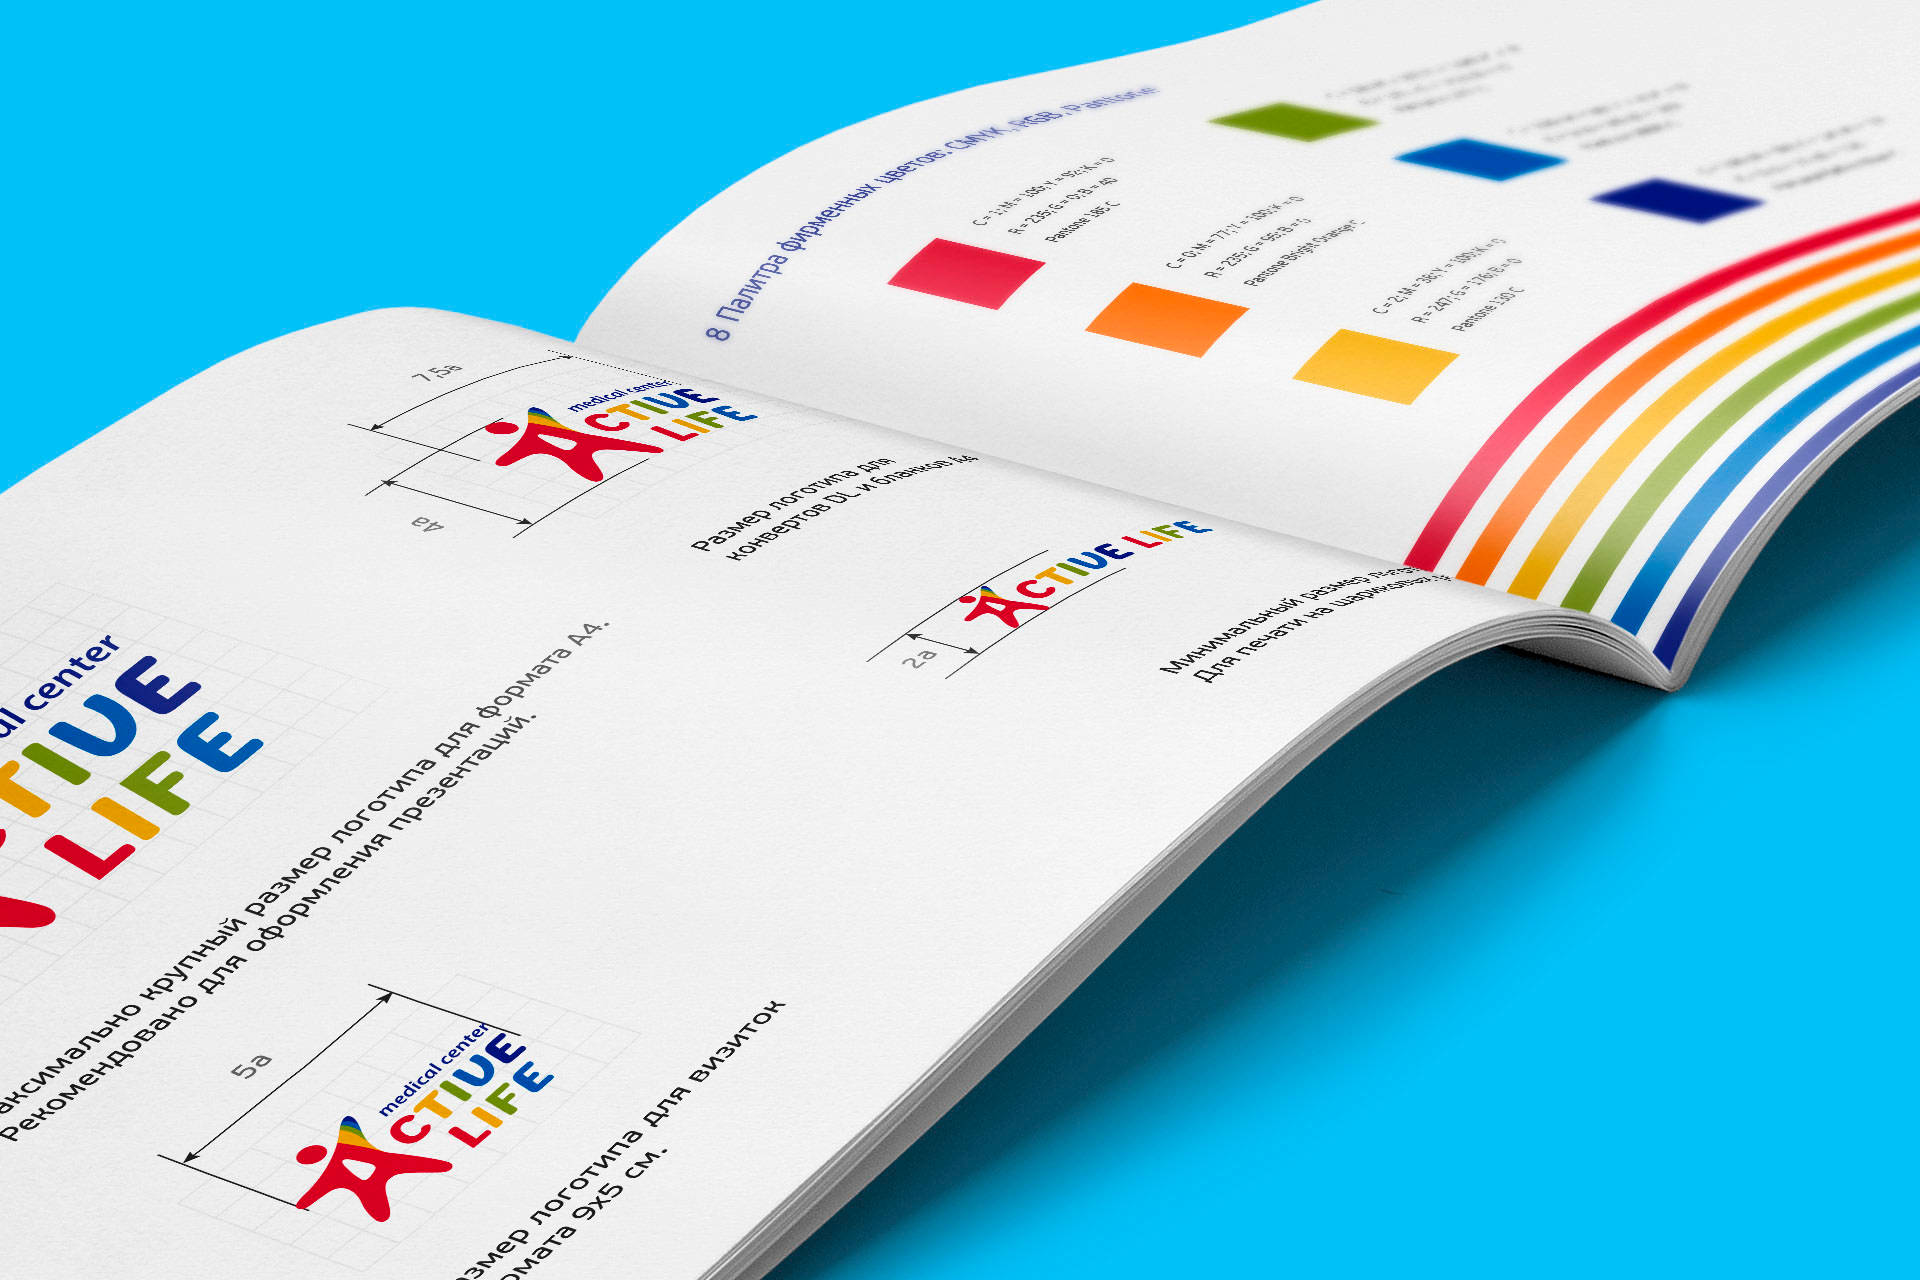 Дизайн of the brand book for the medical center, Brand book design for medical center